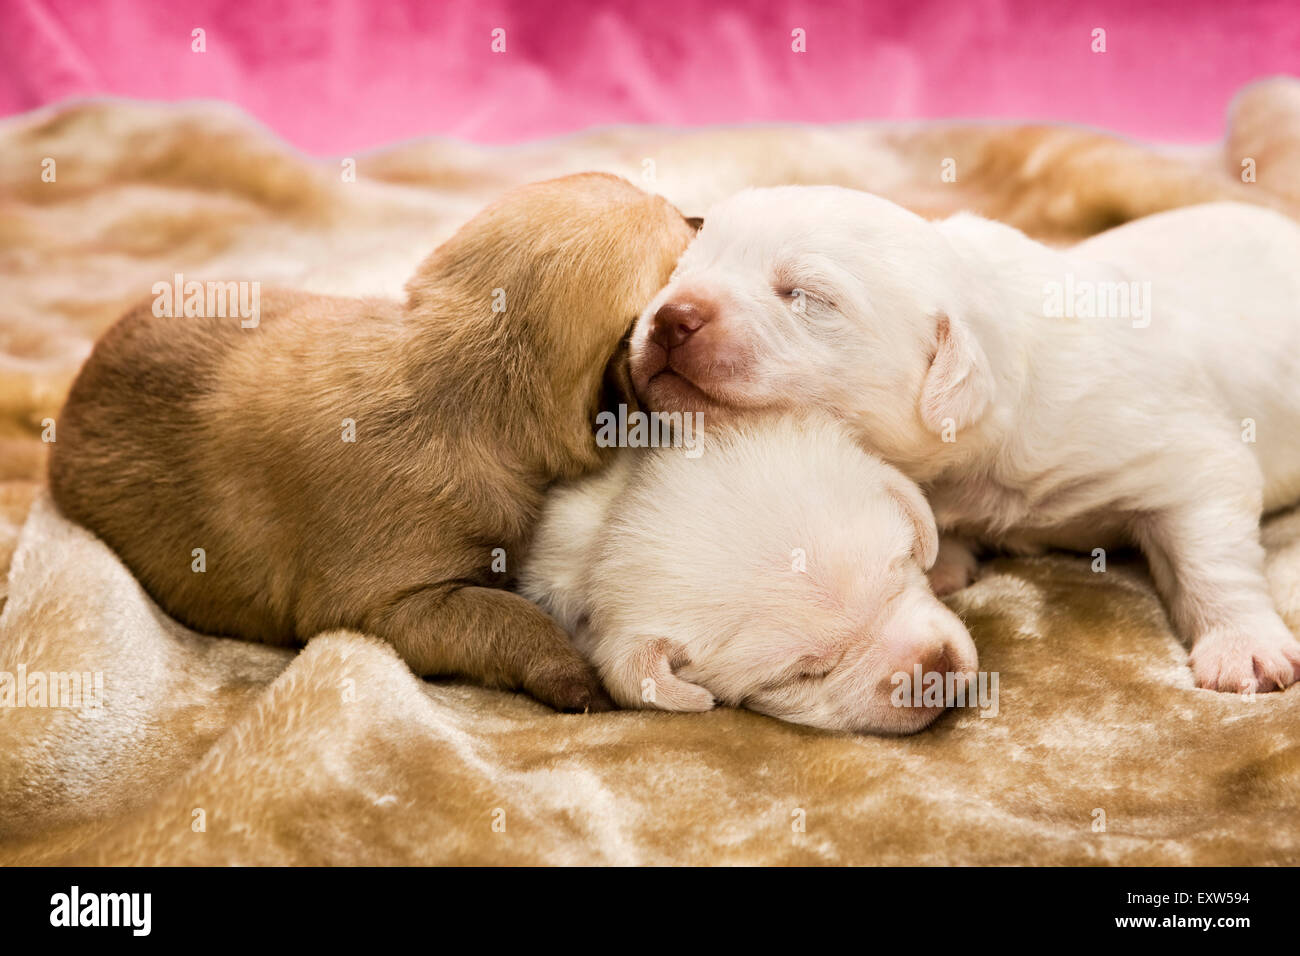 Three one week old puppies asleep on top of each other Stock Photo